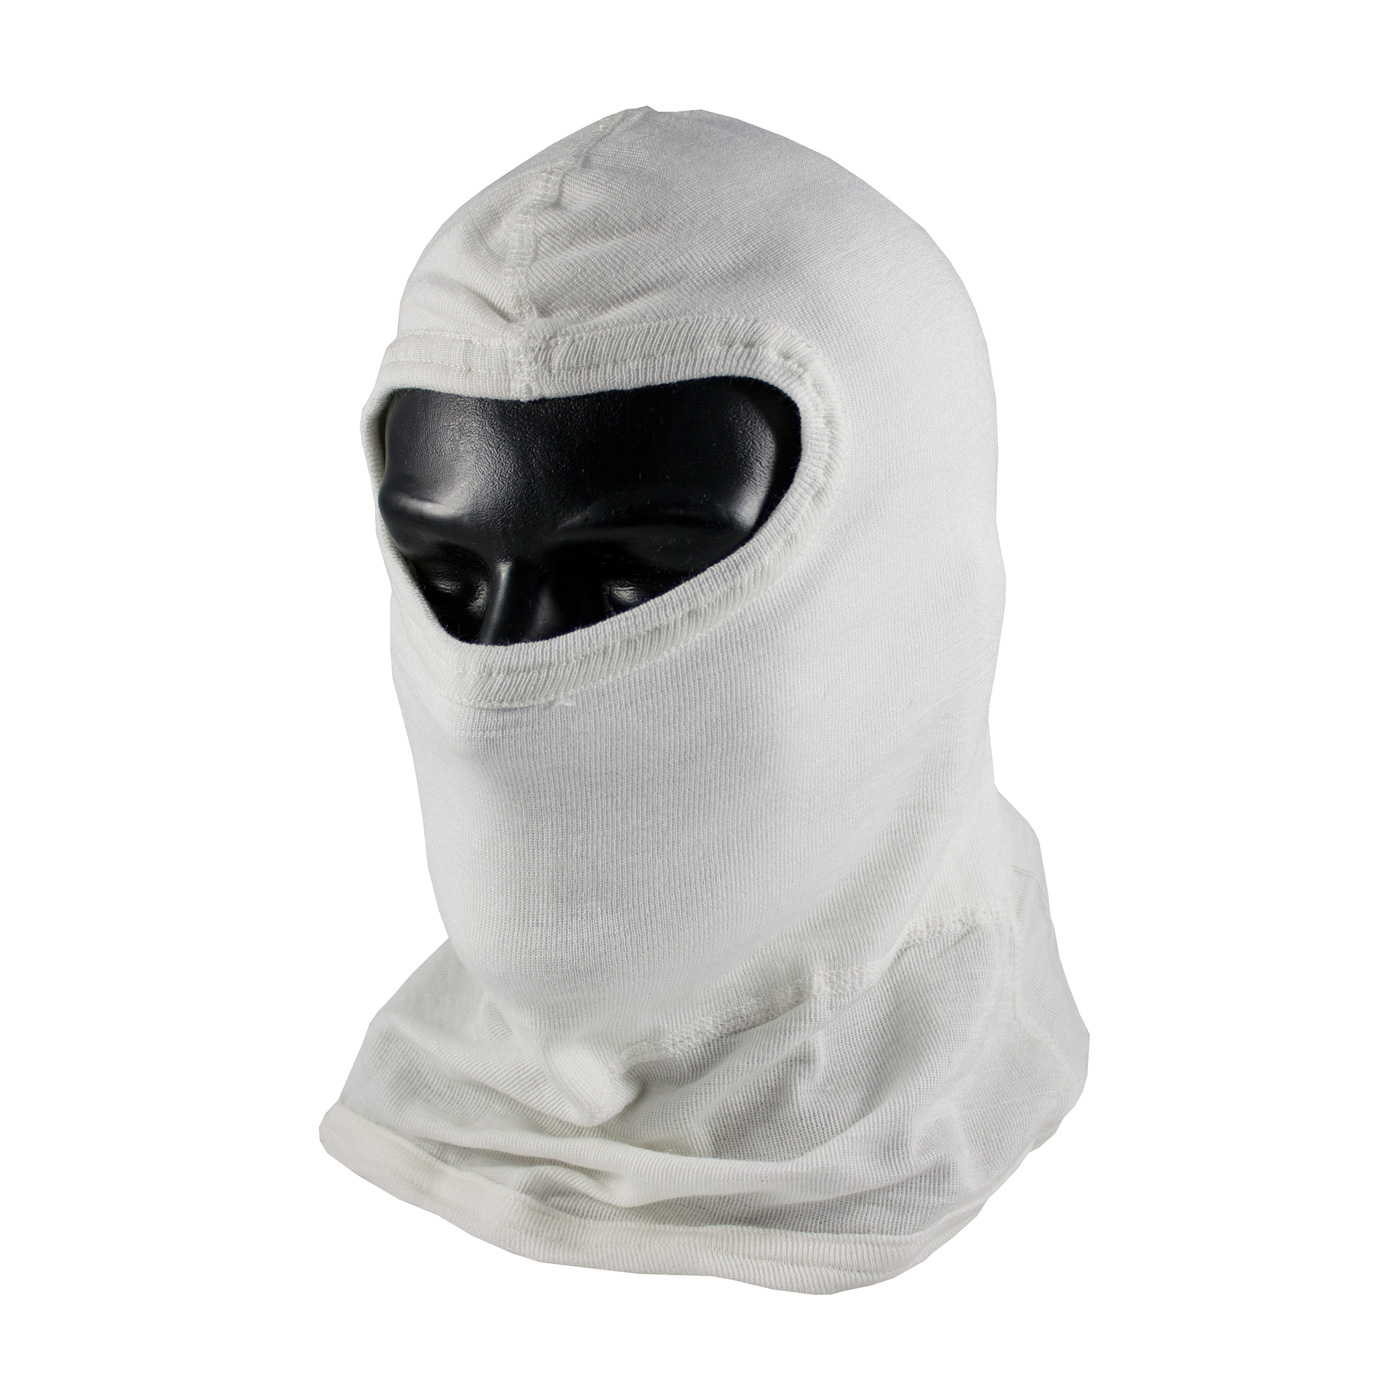 PIP® Nomex® White Double Layer Fire Resistant Full Face Slit Eye Hood With Bib - One Size